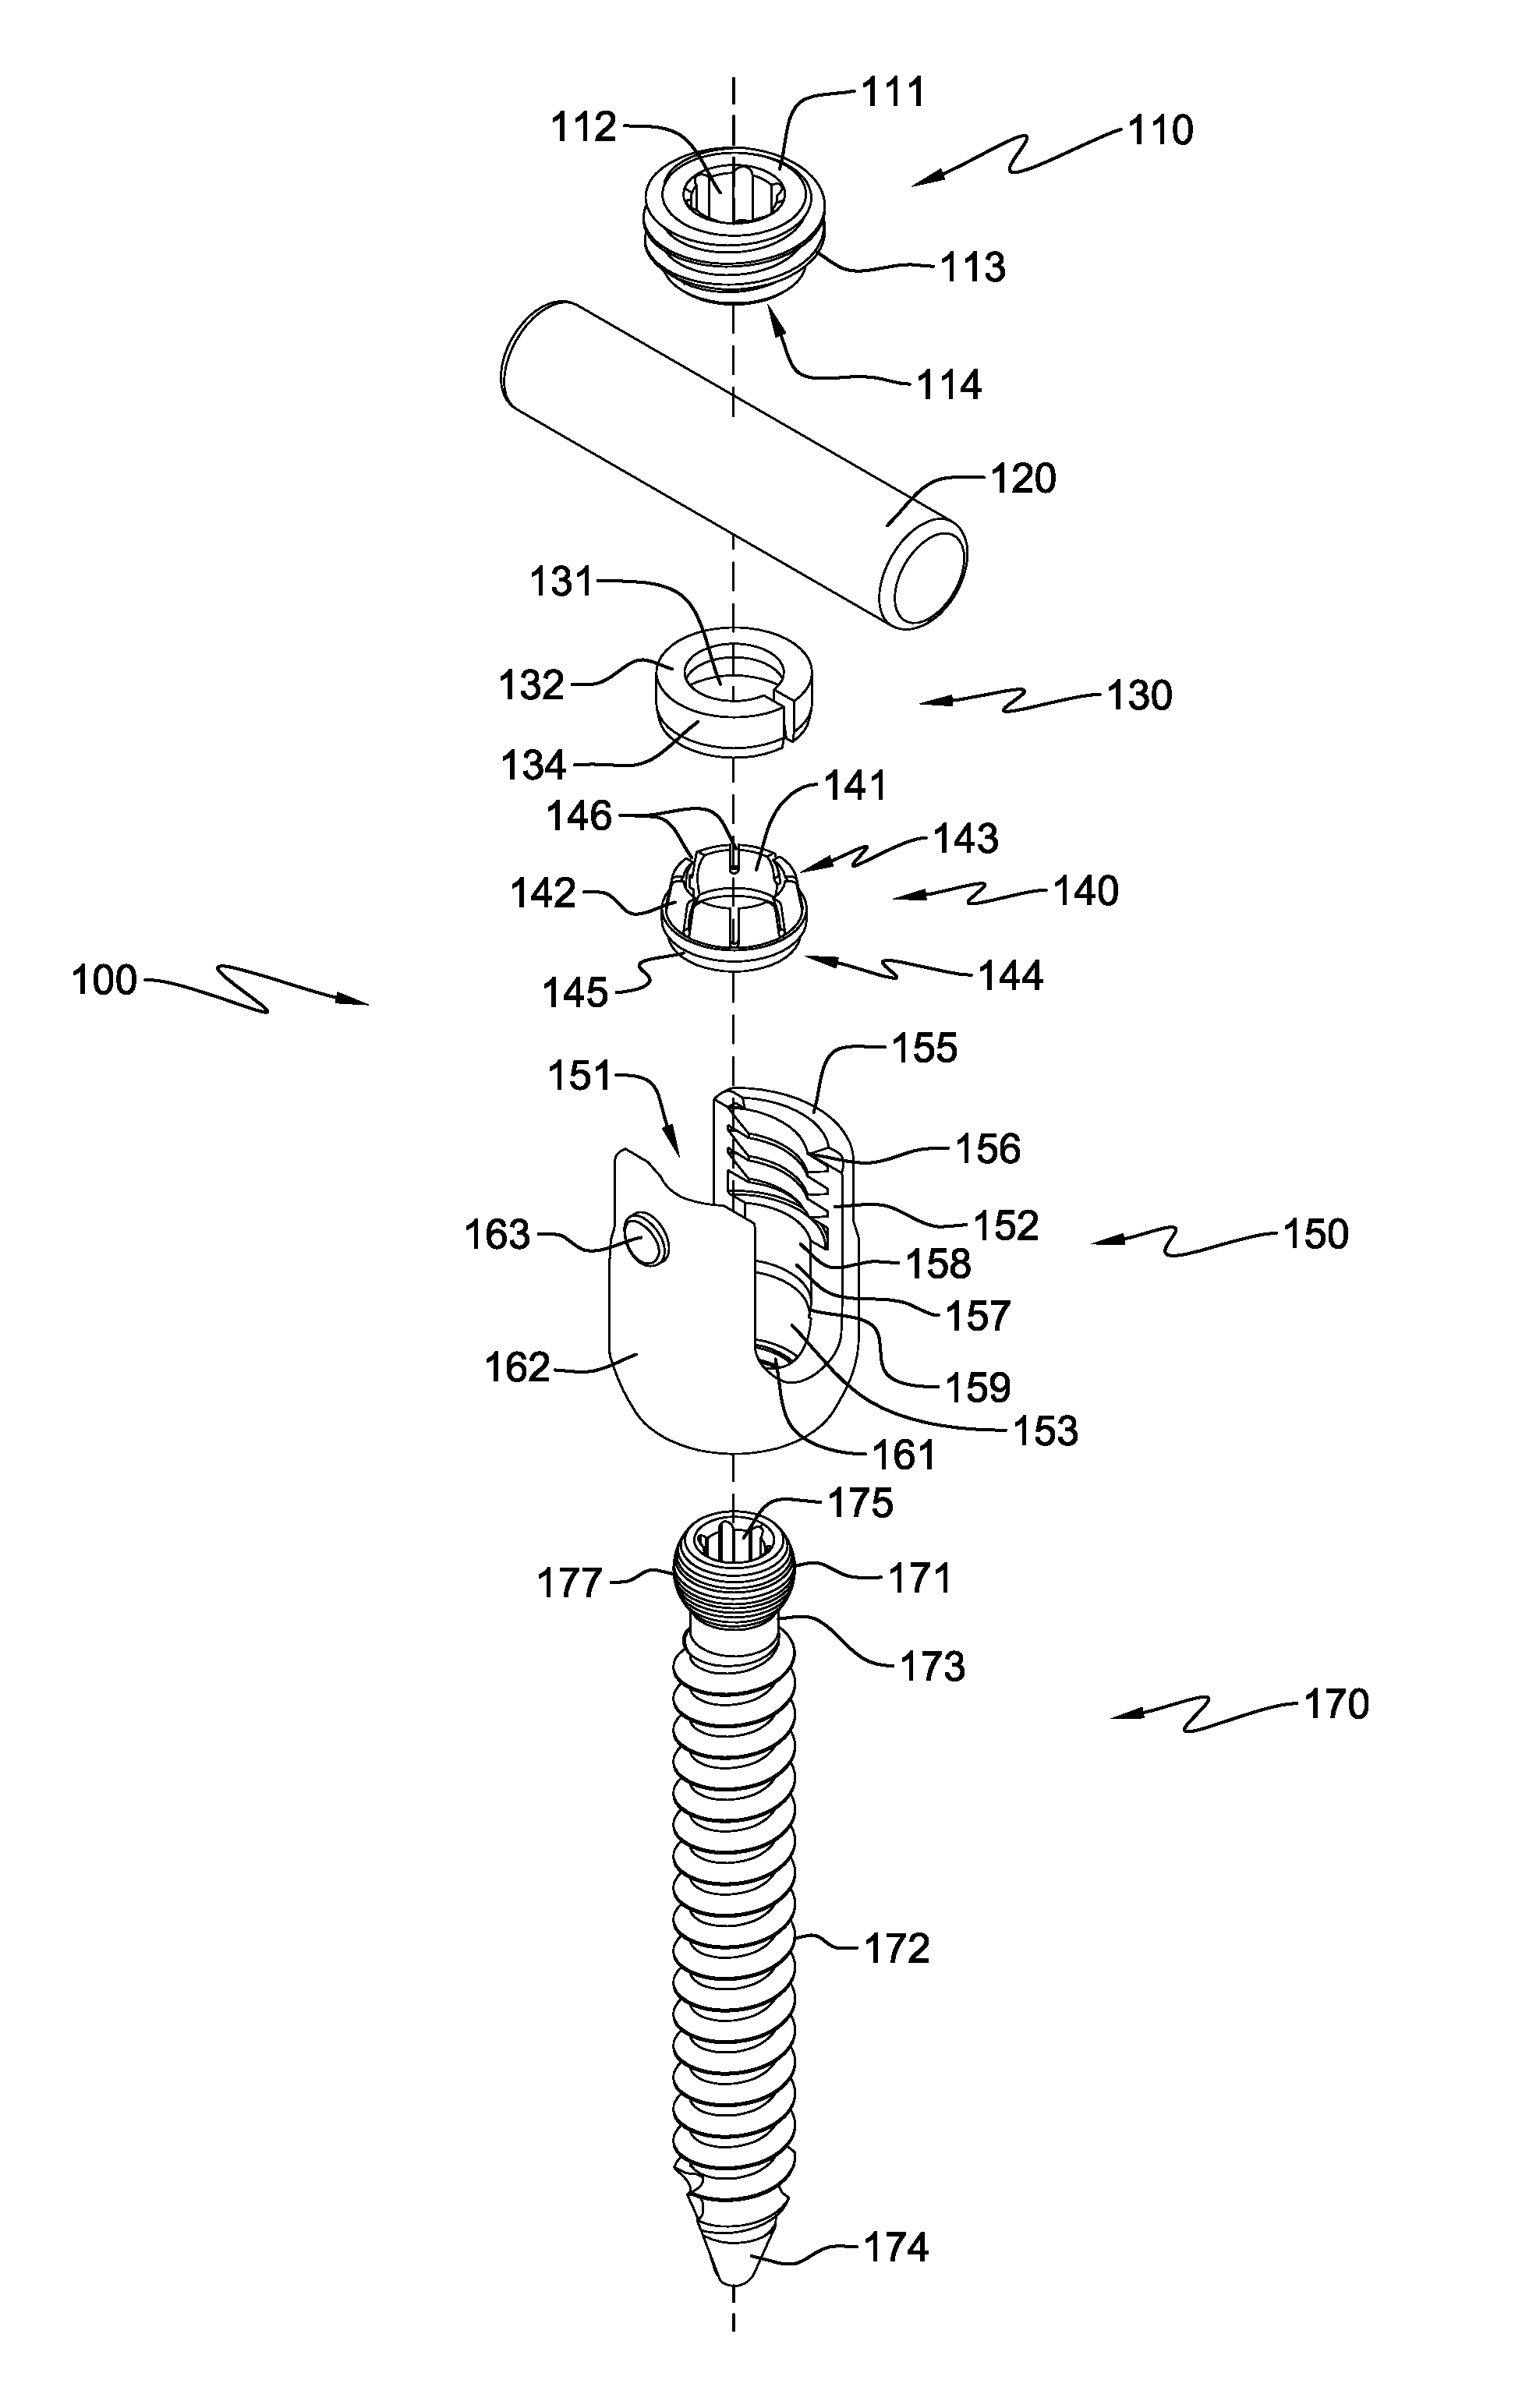 Pedicle screw assembly and method of assembly